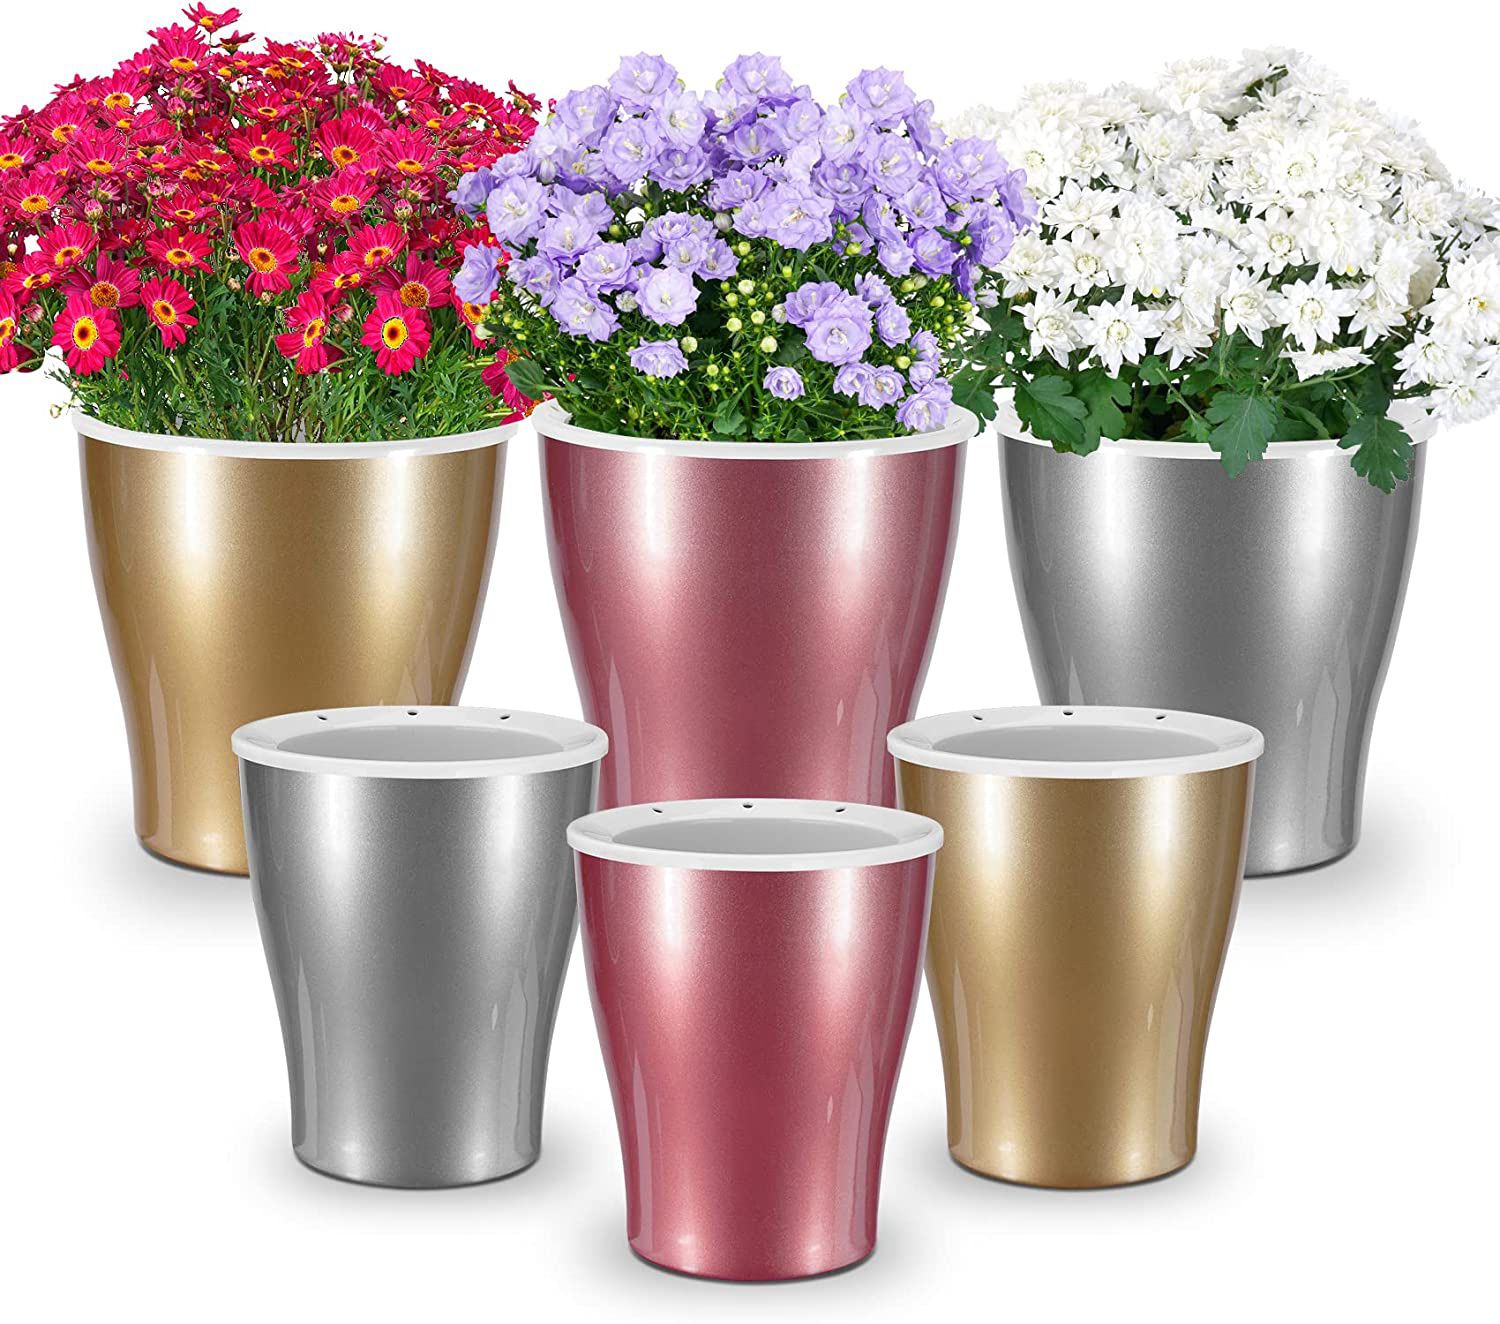 6 Self Watering Planter Premium Plant Flower Pot Indoor Gold Silver Rose 5” &7” New Sealed Box